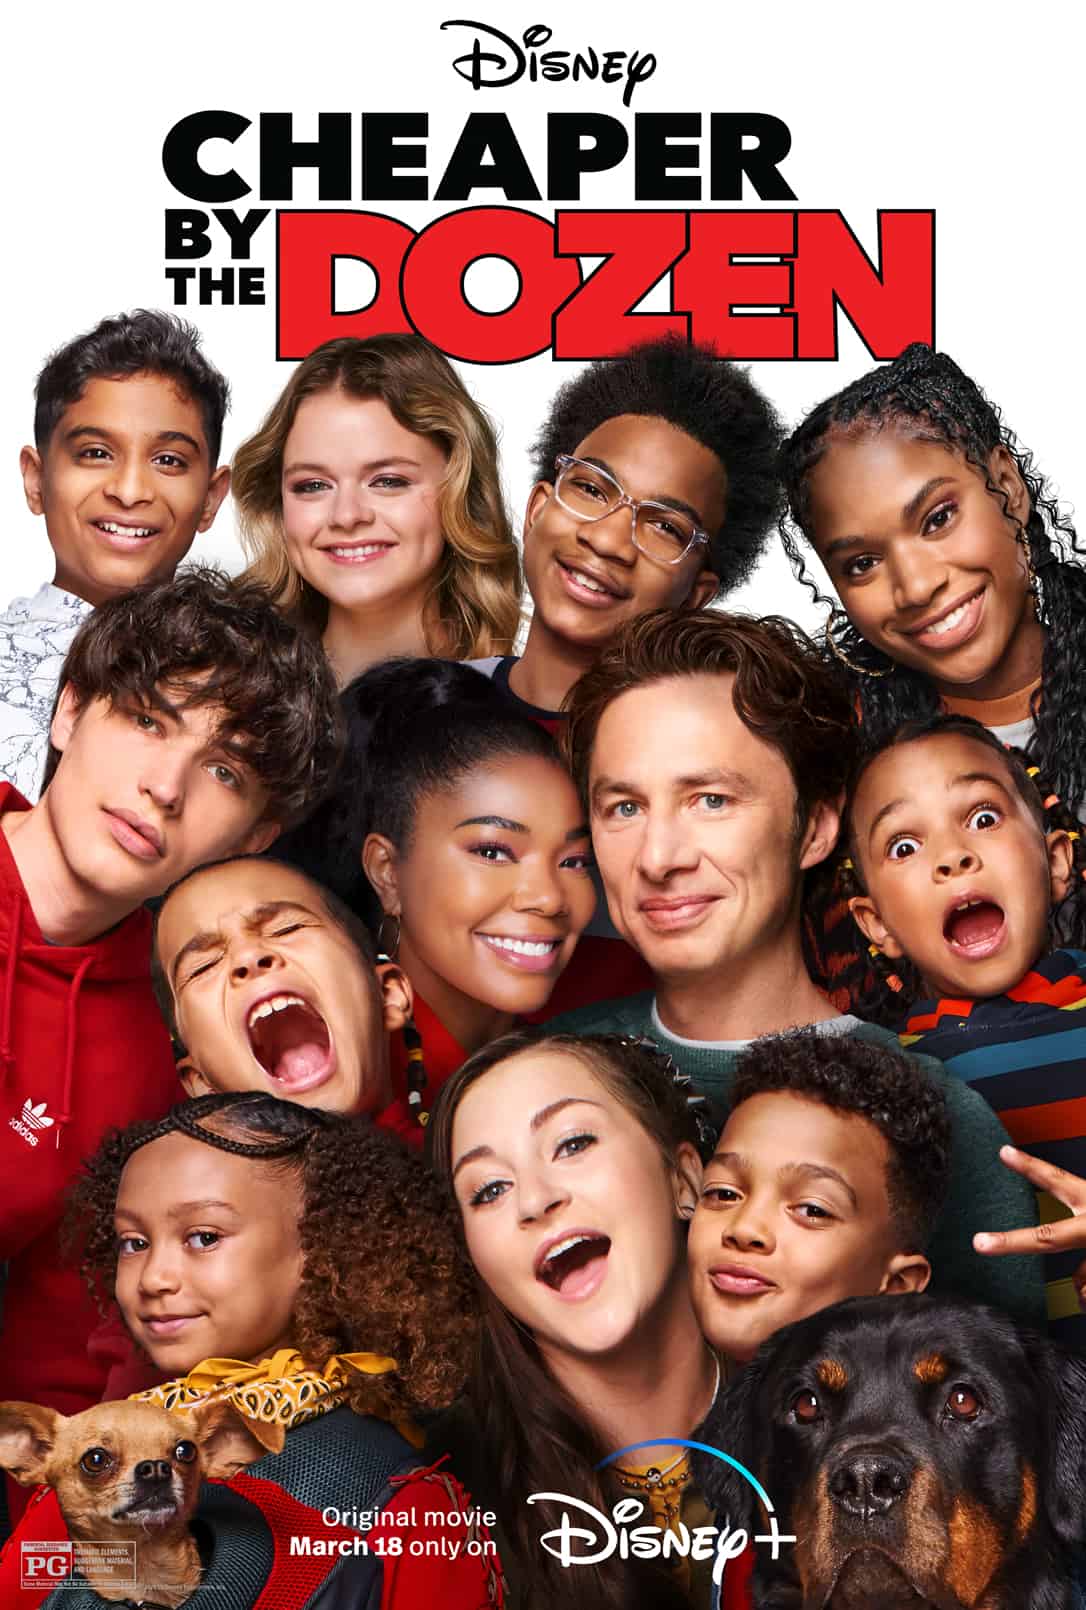 CHEAPER BY THE DOZEN review